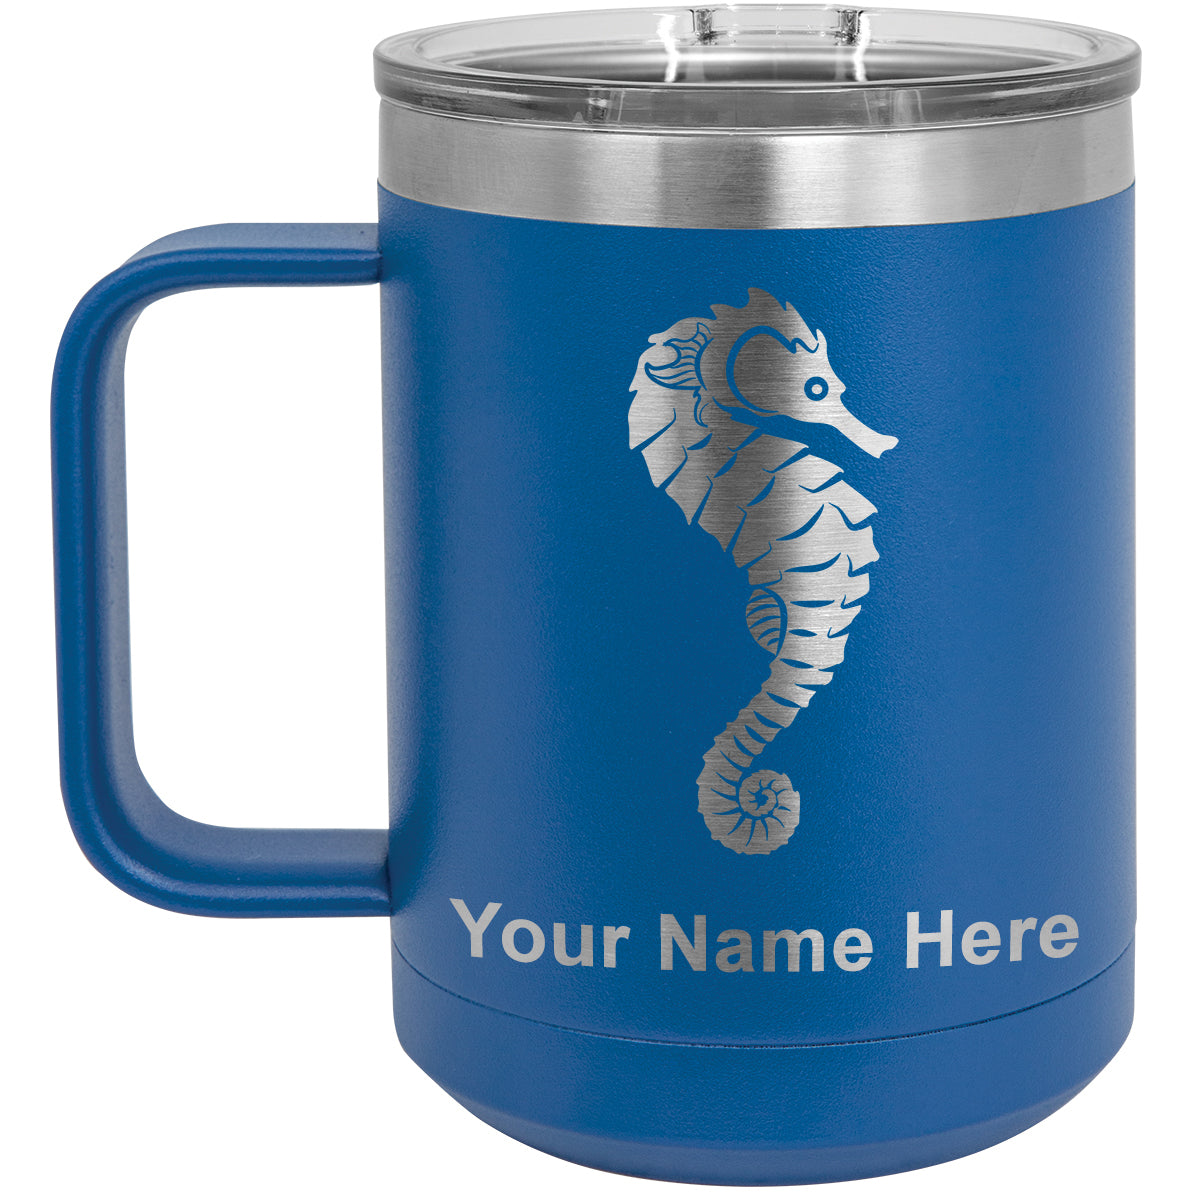 15oz Vacuum Insulated Coffee Mug, Seahorse, Personalized Engraving Included